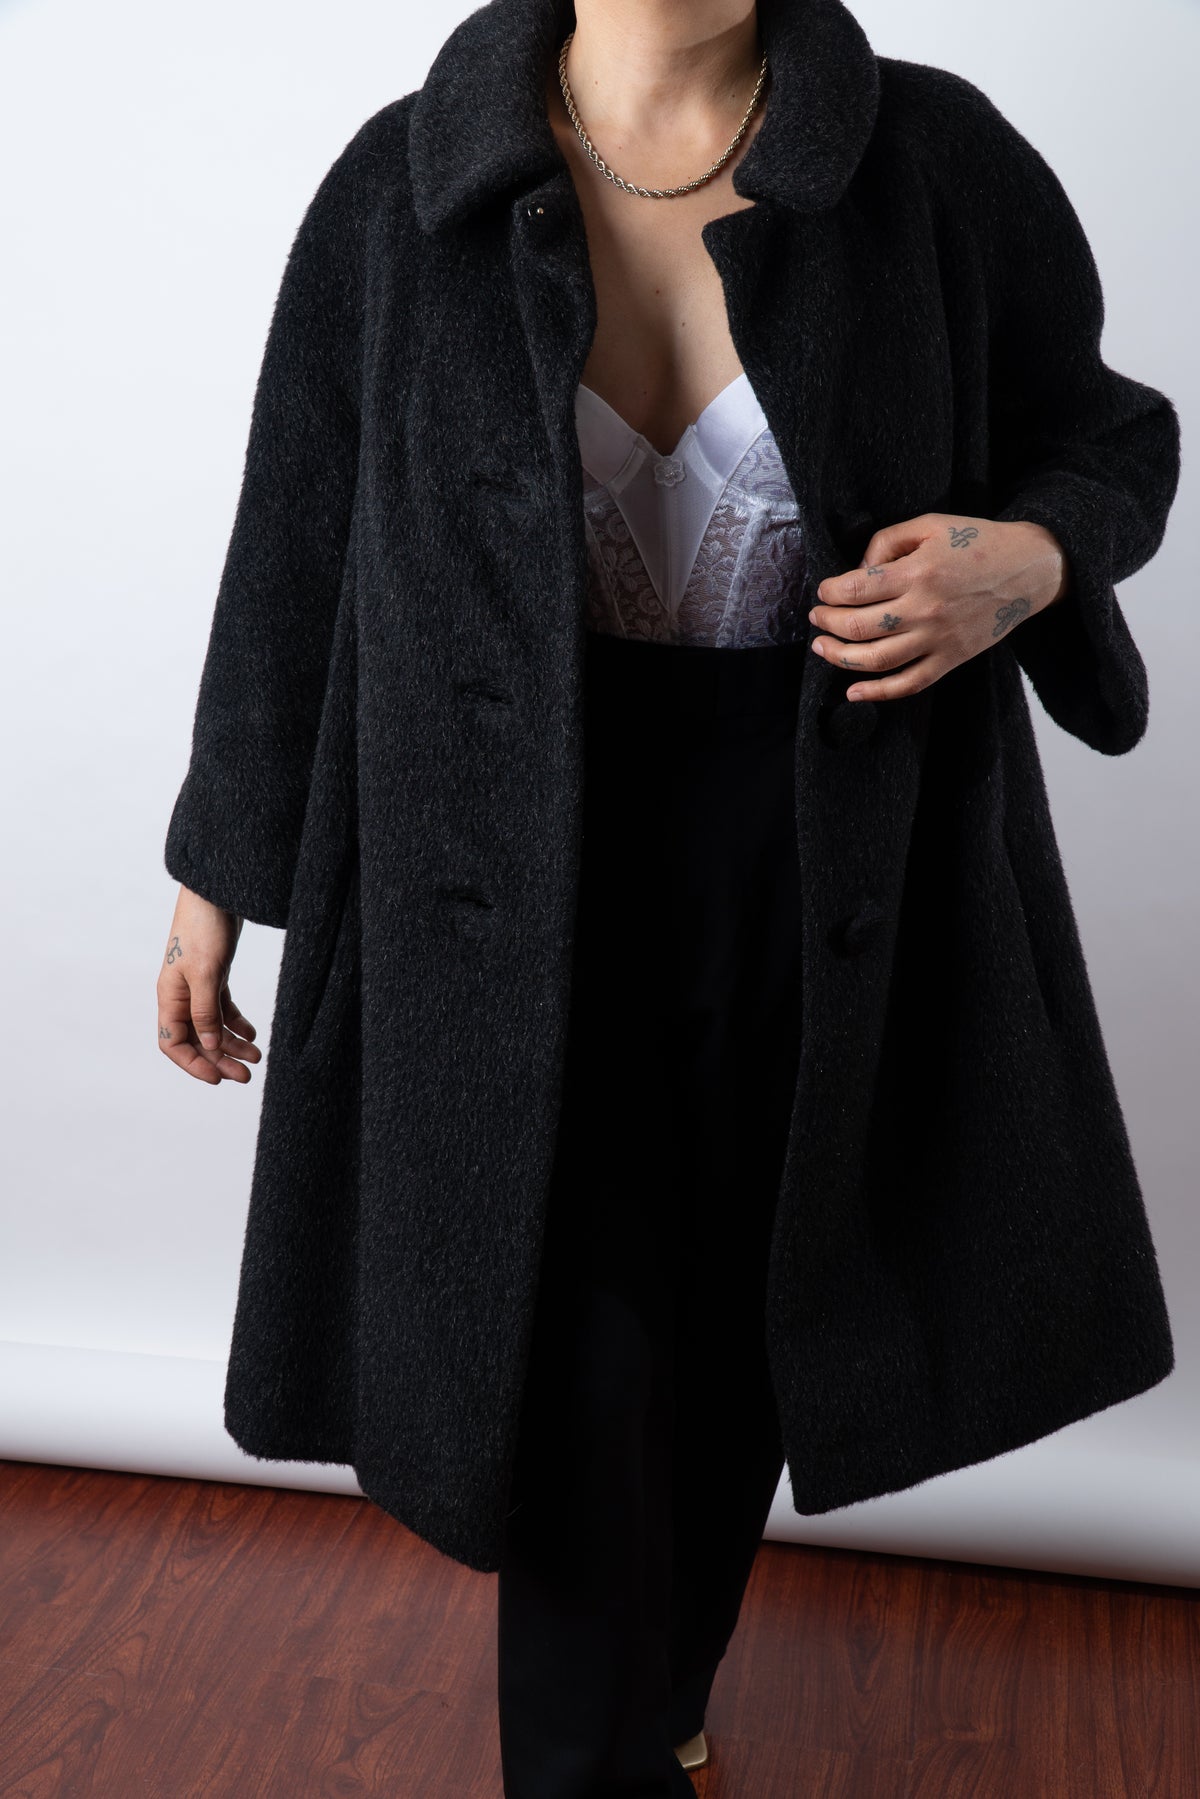 Vintage Inspired Long Wool Princess Coat Women Fit and Flare Coat